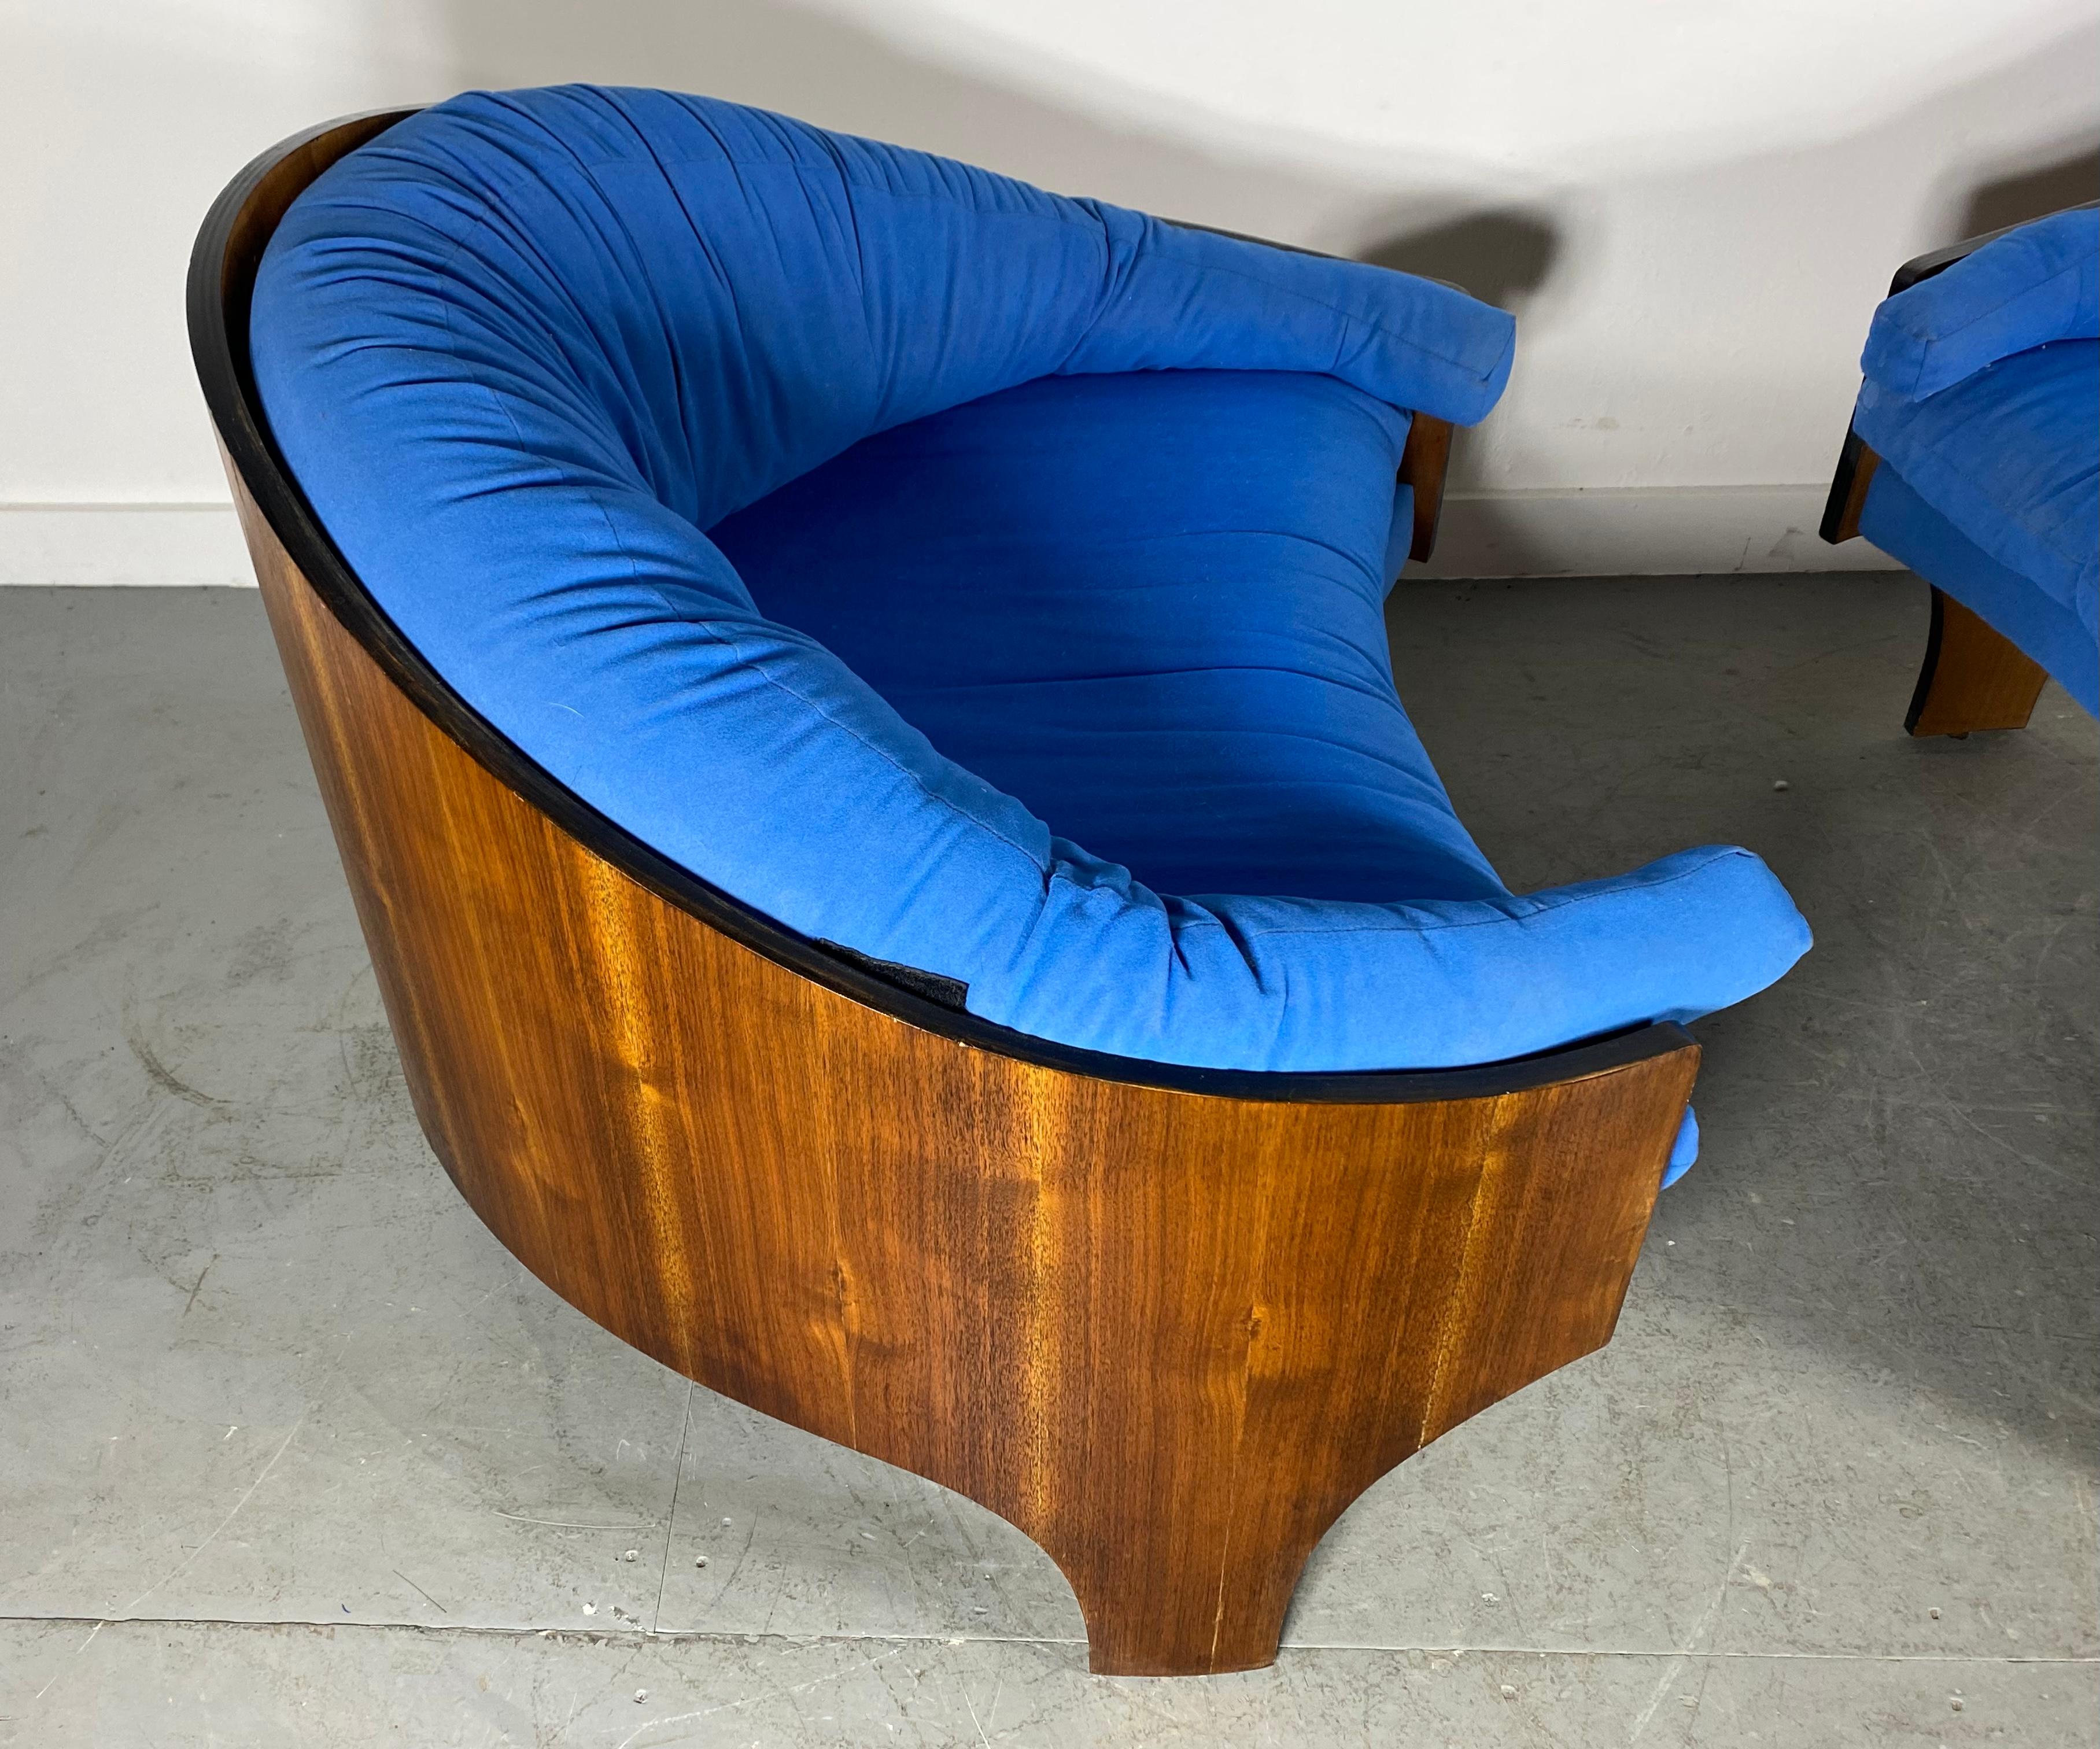 Henry Glass Intimate Island Lounge Chairs Stunning Moulded Walnut For Sale 3